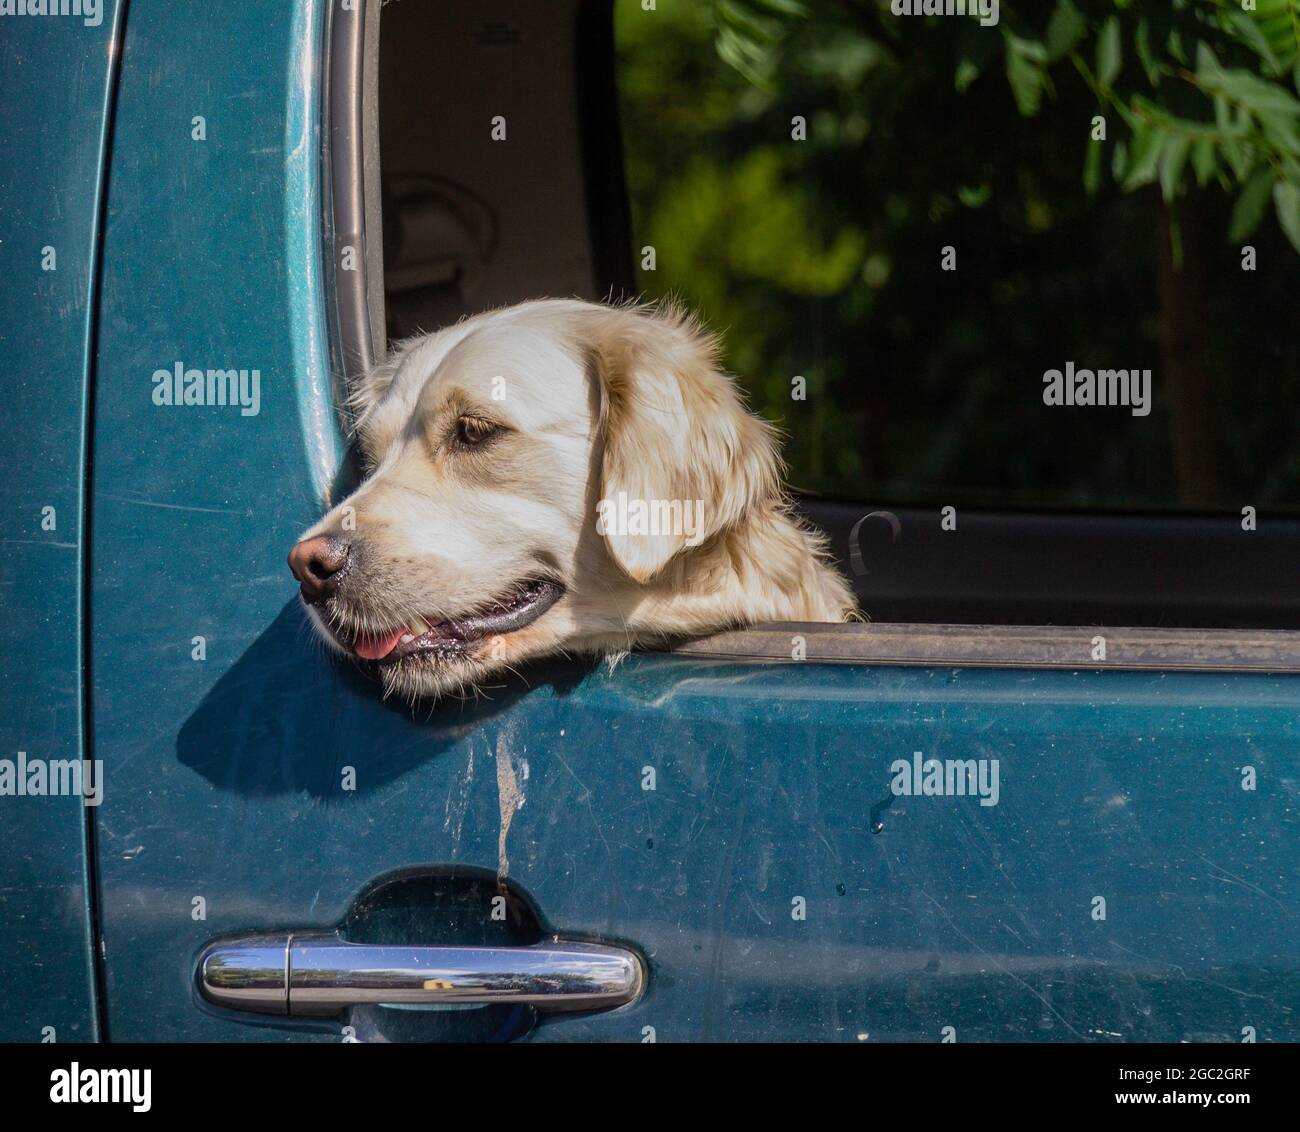 Golden Retriever Dog looking out car window Stock Photo